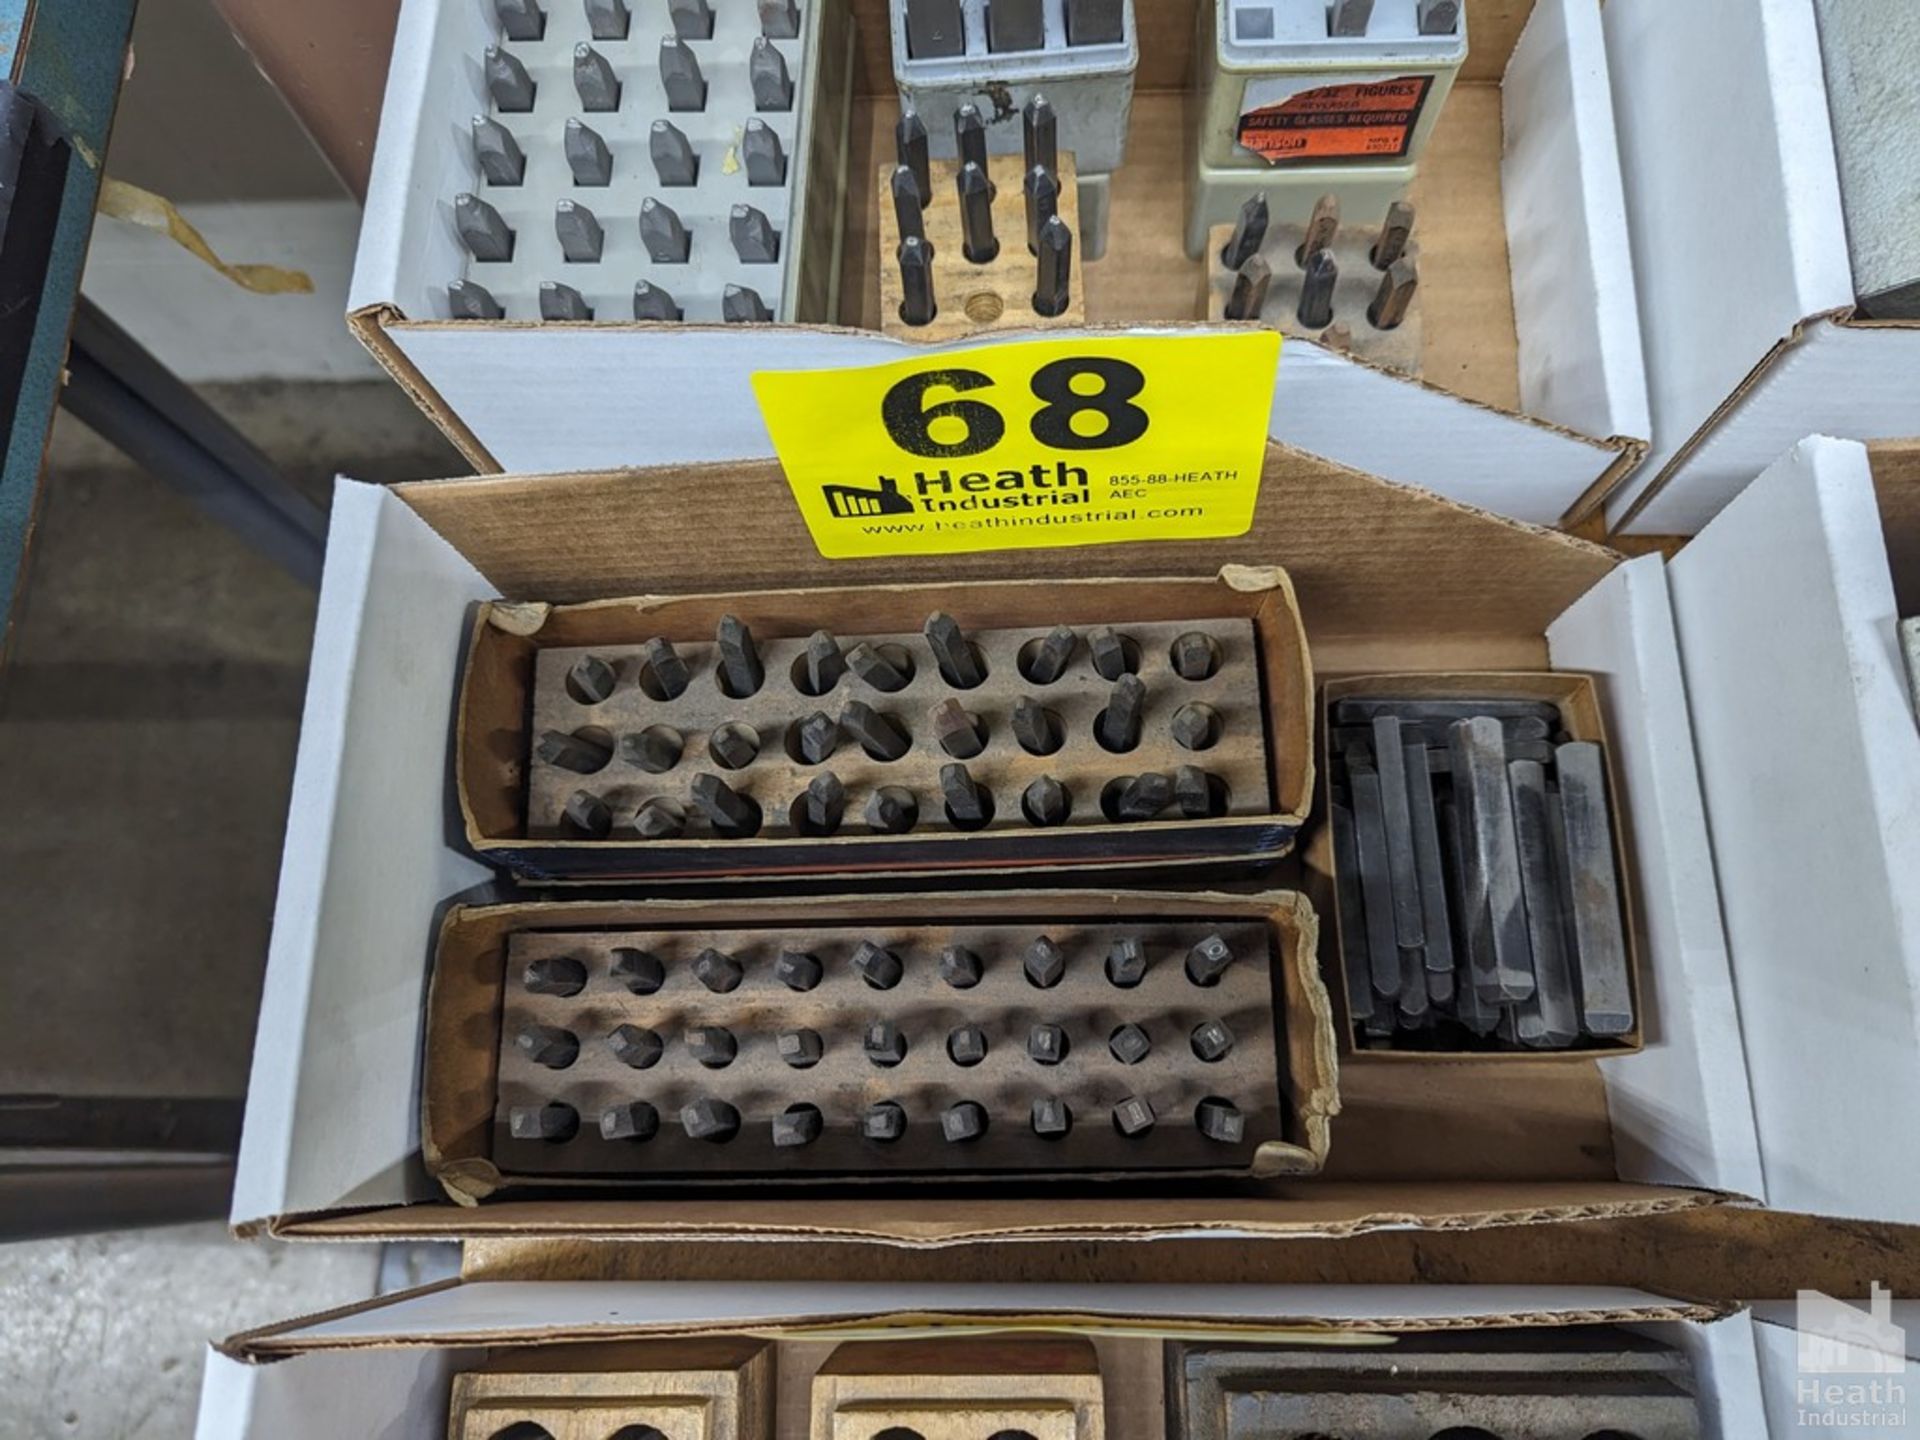 ASSORTED LETTER AND NUMBER STAMPS IN BOX